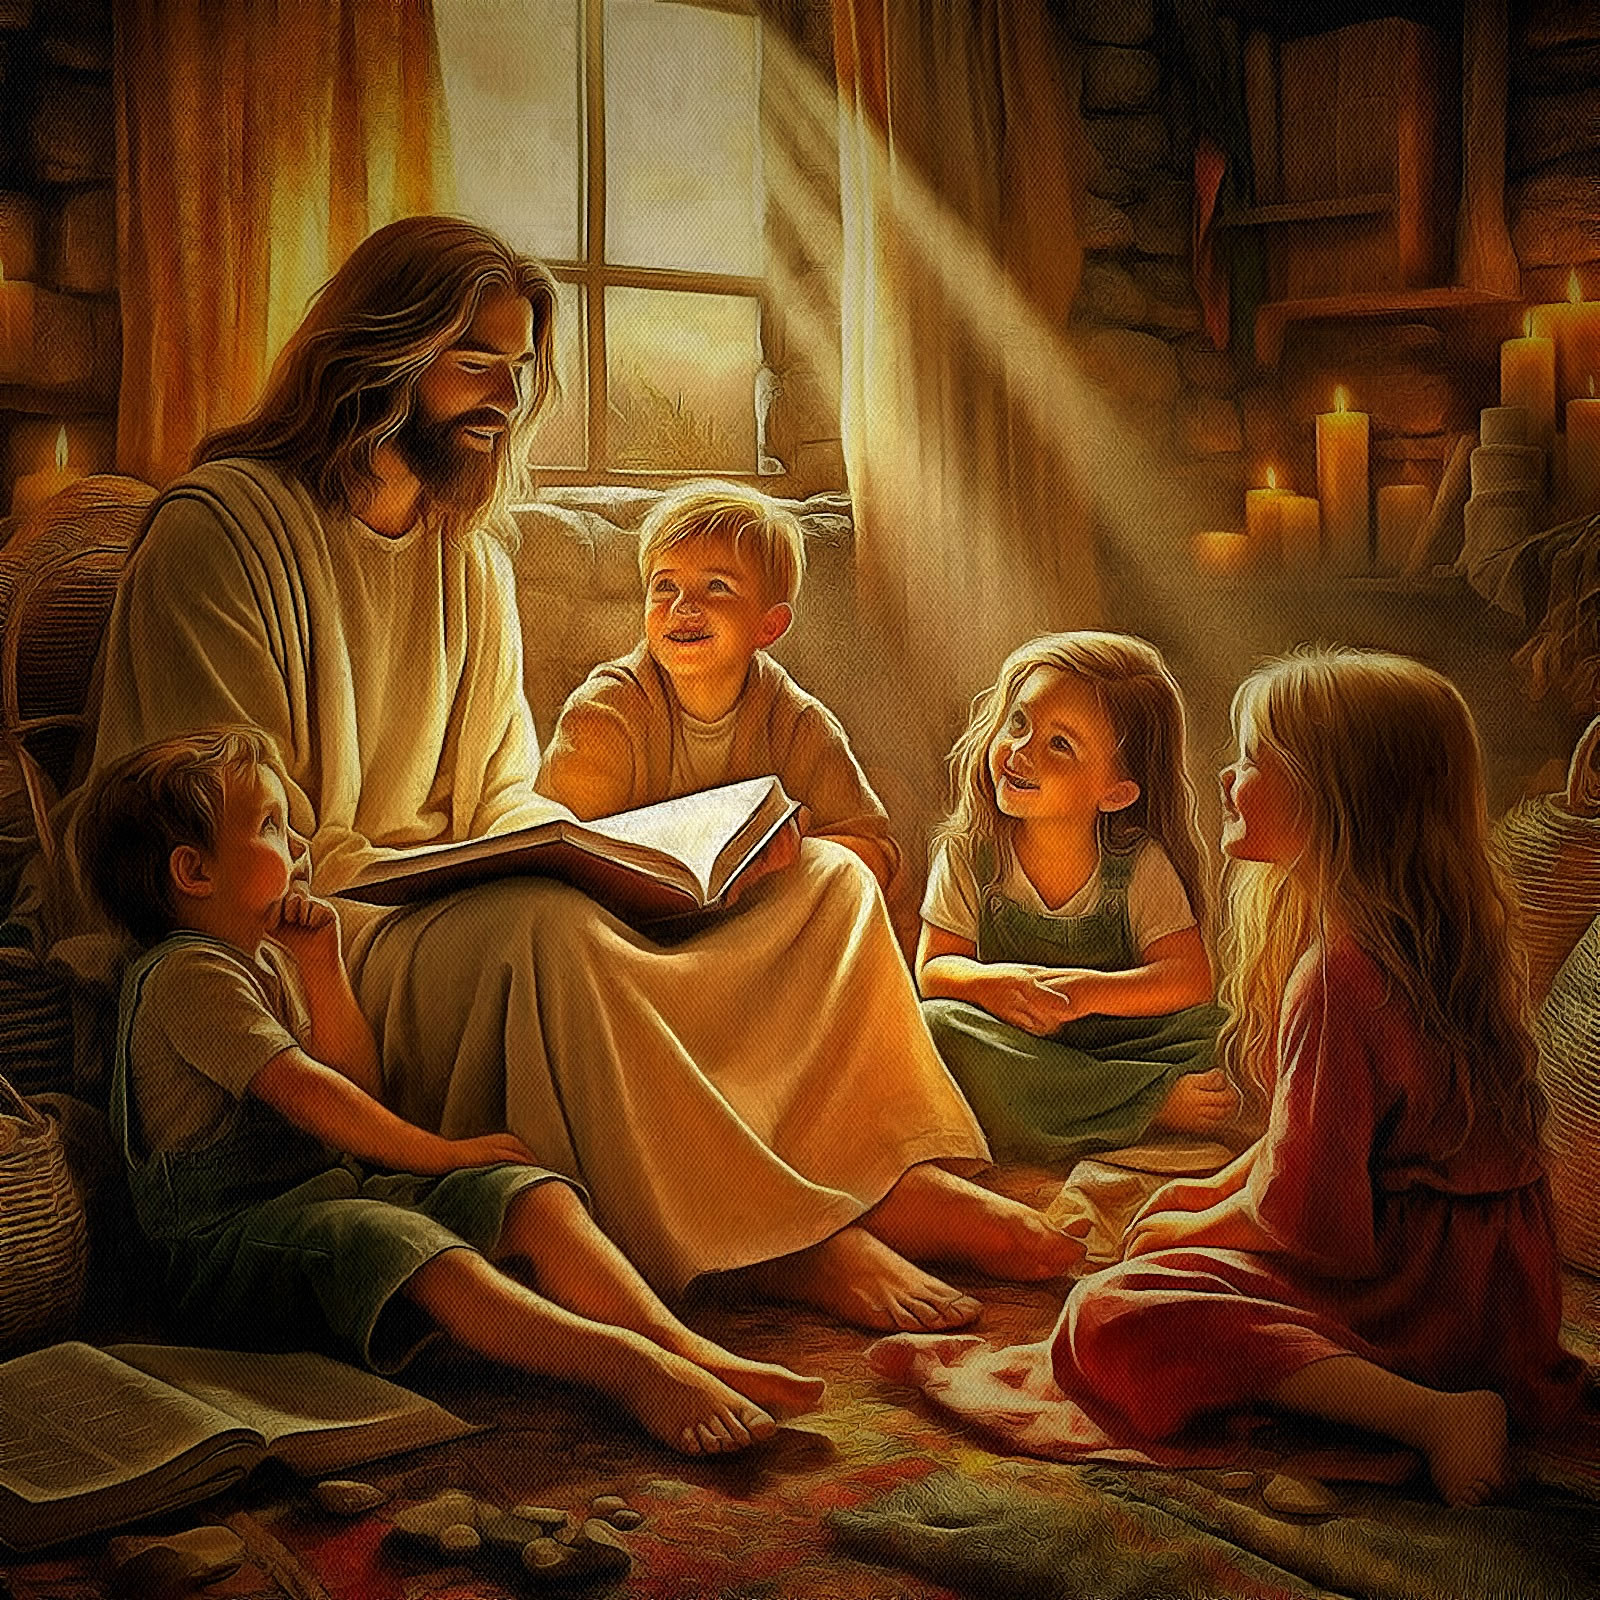 Imaginary Bible Story of Imaginary Bible Story Scene of Jesus showing his love for children by reading to them